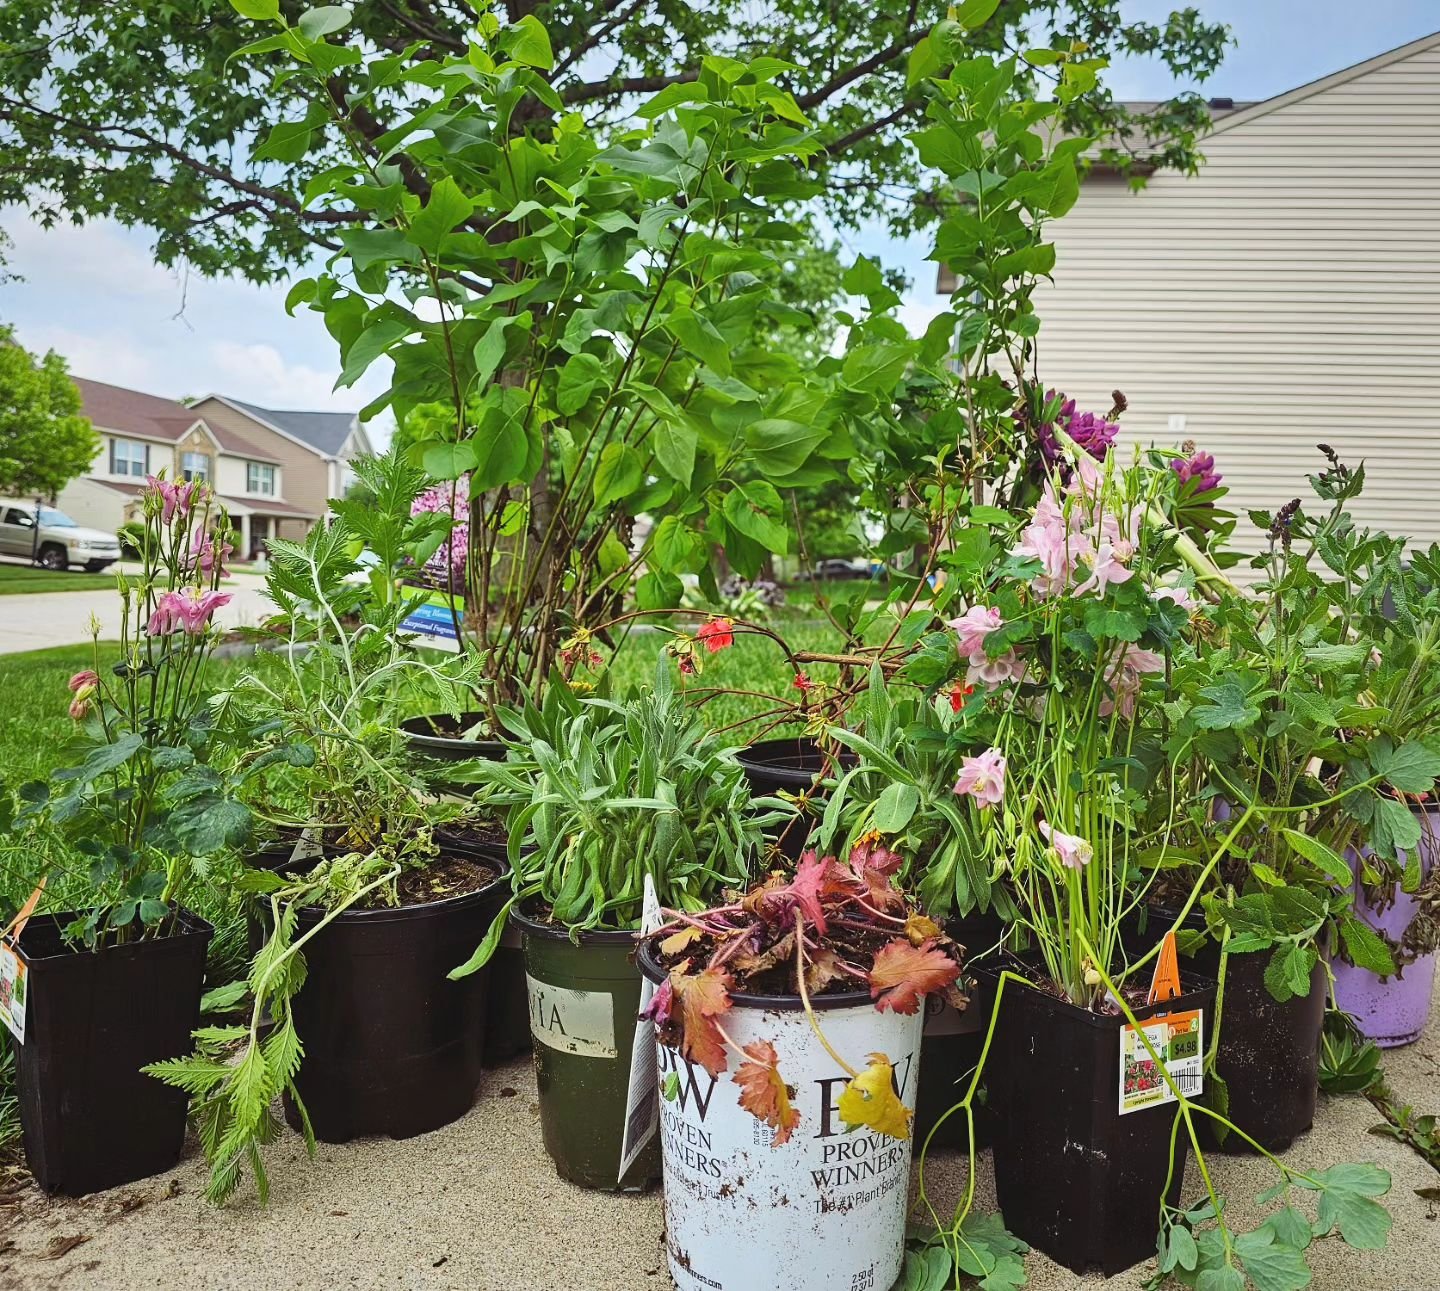 Take a look at this picture. This is a new set of perennial plants that have been hand-picked for our garden. They were chosen to bring beauty and pollinators to our property and to continue expanding our garden space.

You might notice these plants 